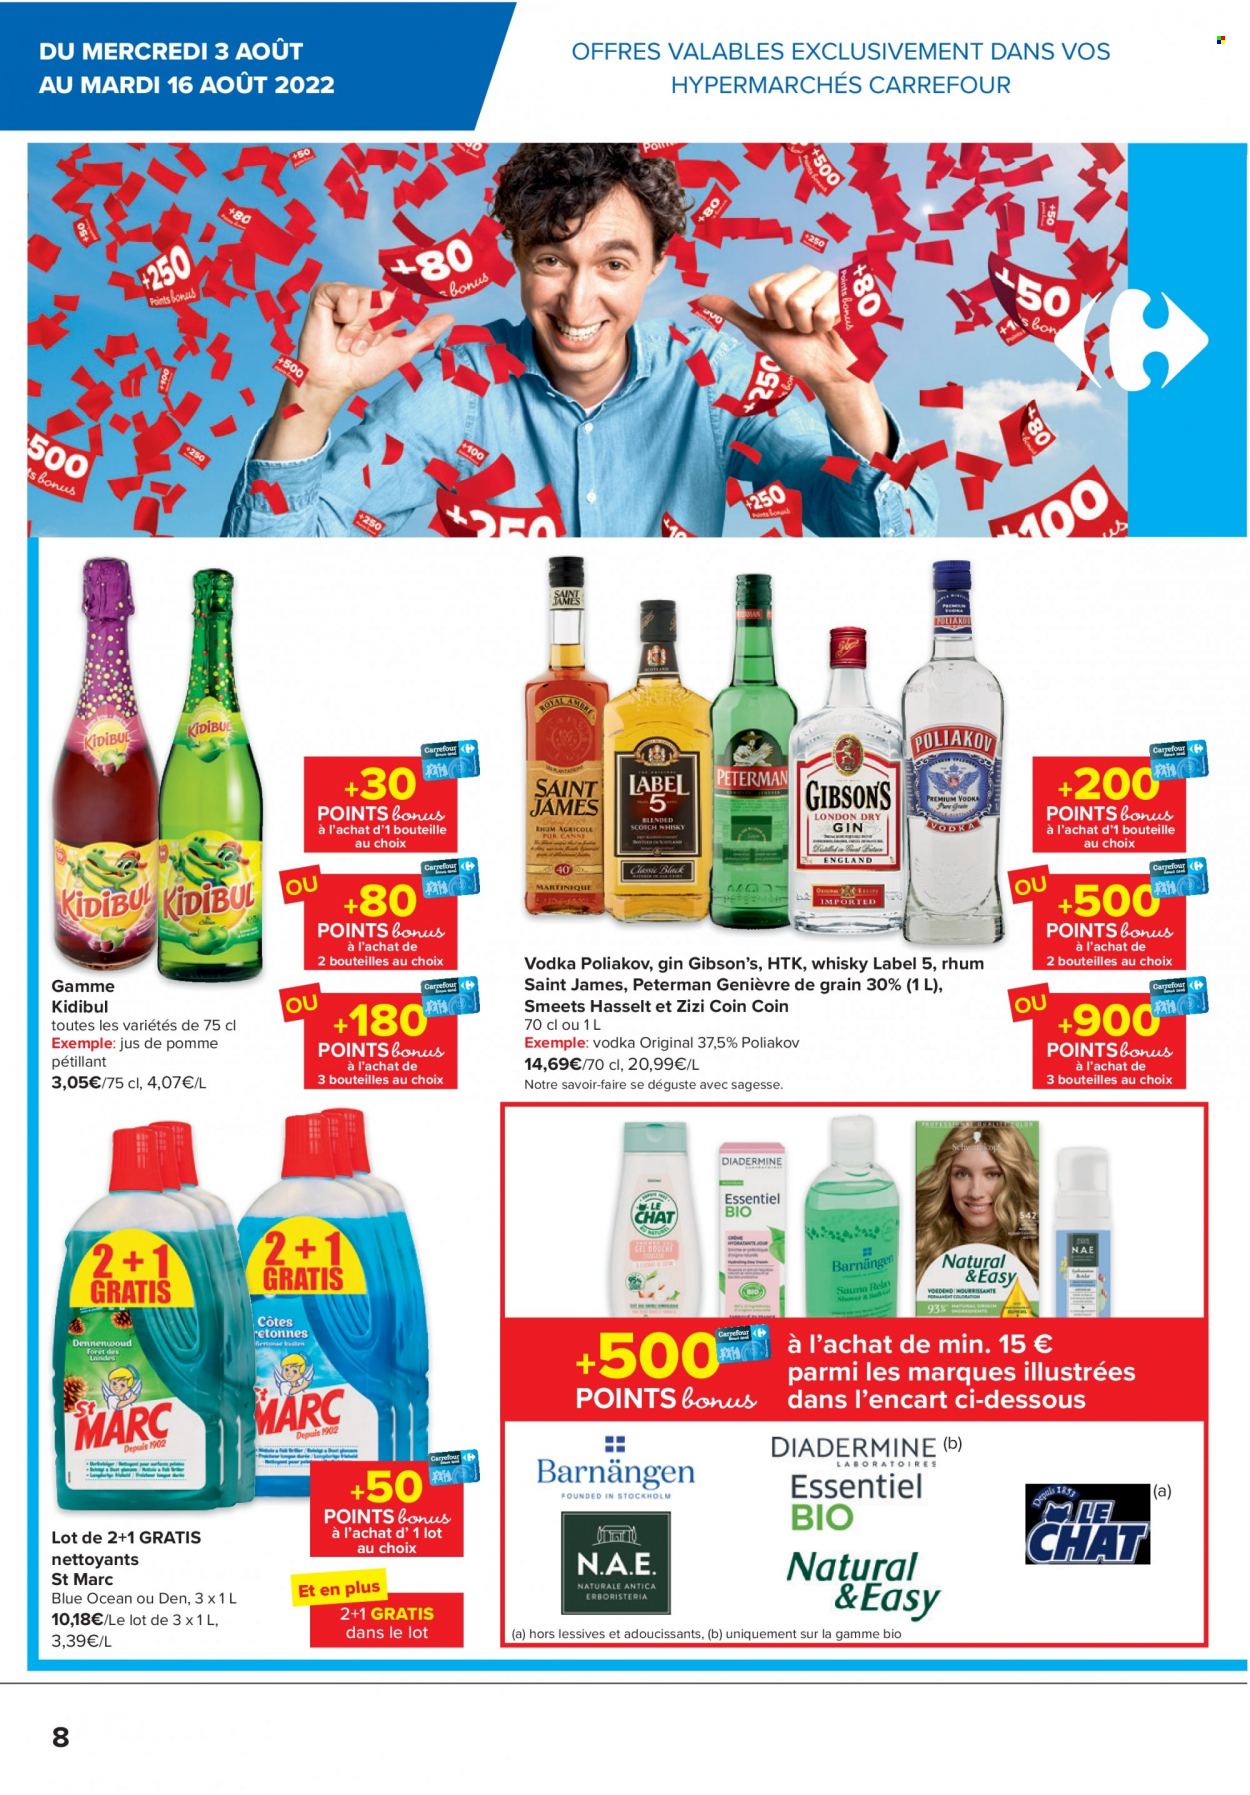 Catalogue Carrefour hypermarkt - 3.8.2022 - 16.8.2022. Page 8.